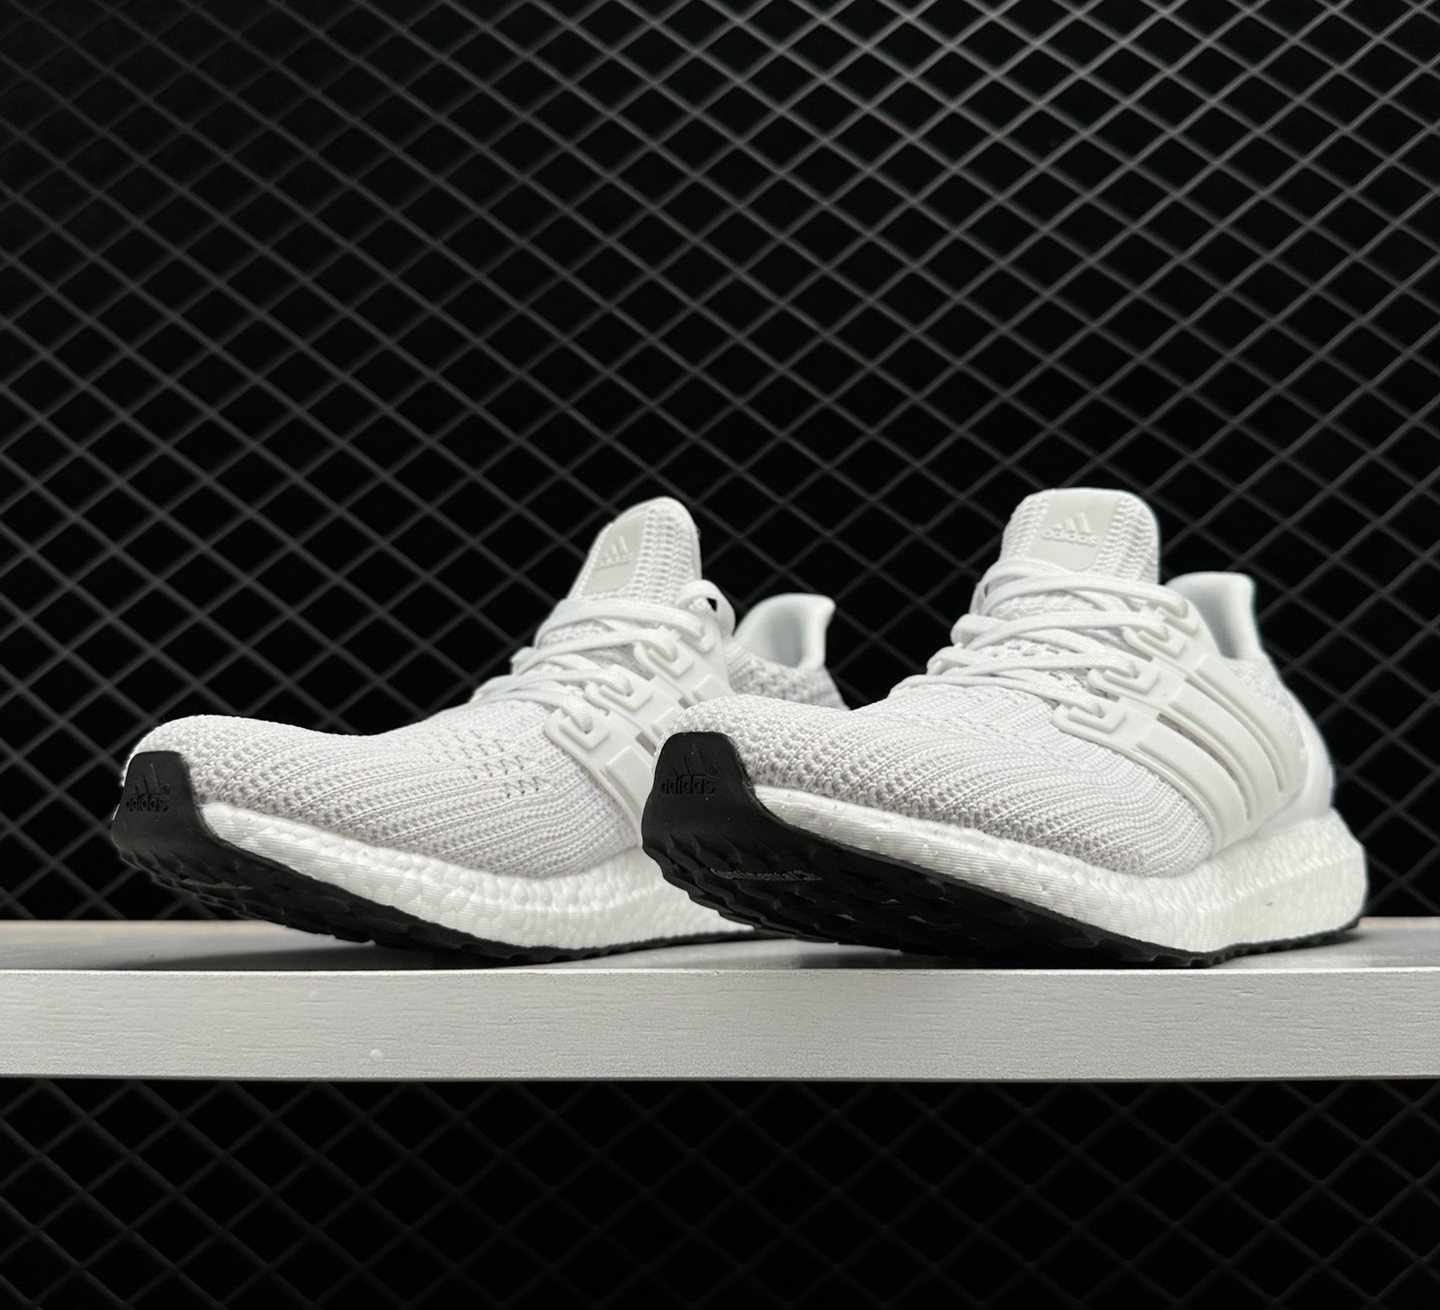 Adidas UltraBoost 2.0 Limited White Reflective BB3928 - Shop Now!